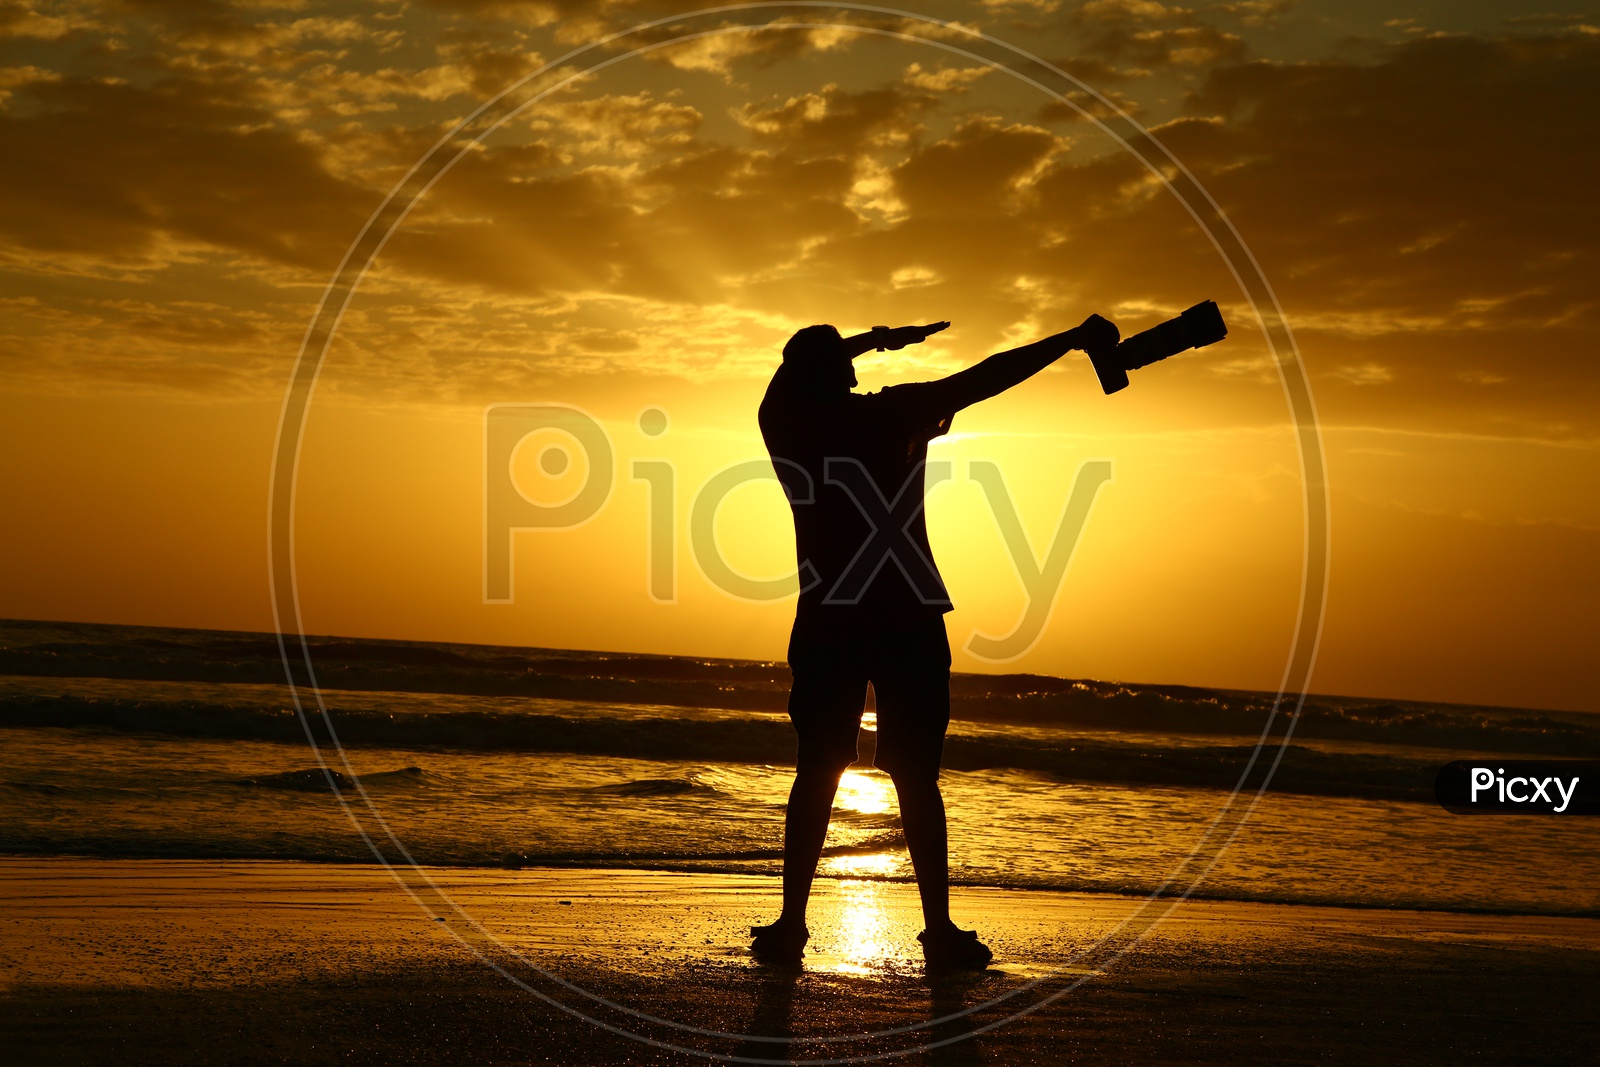 Silhouette Of a Photographer Jumping In Joy With DSLR At a Beach With Sunset Golden Sky In Goa